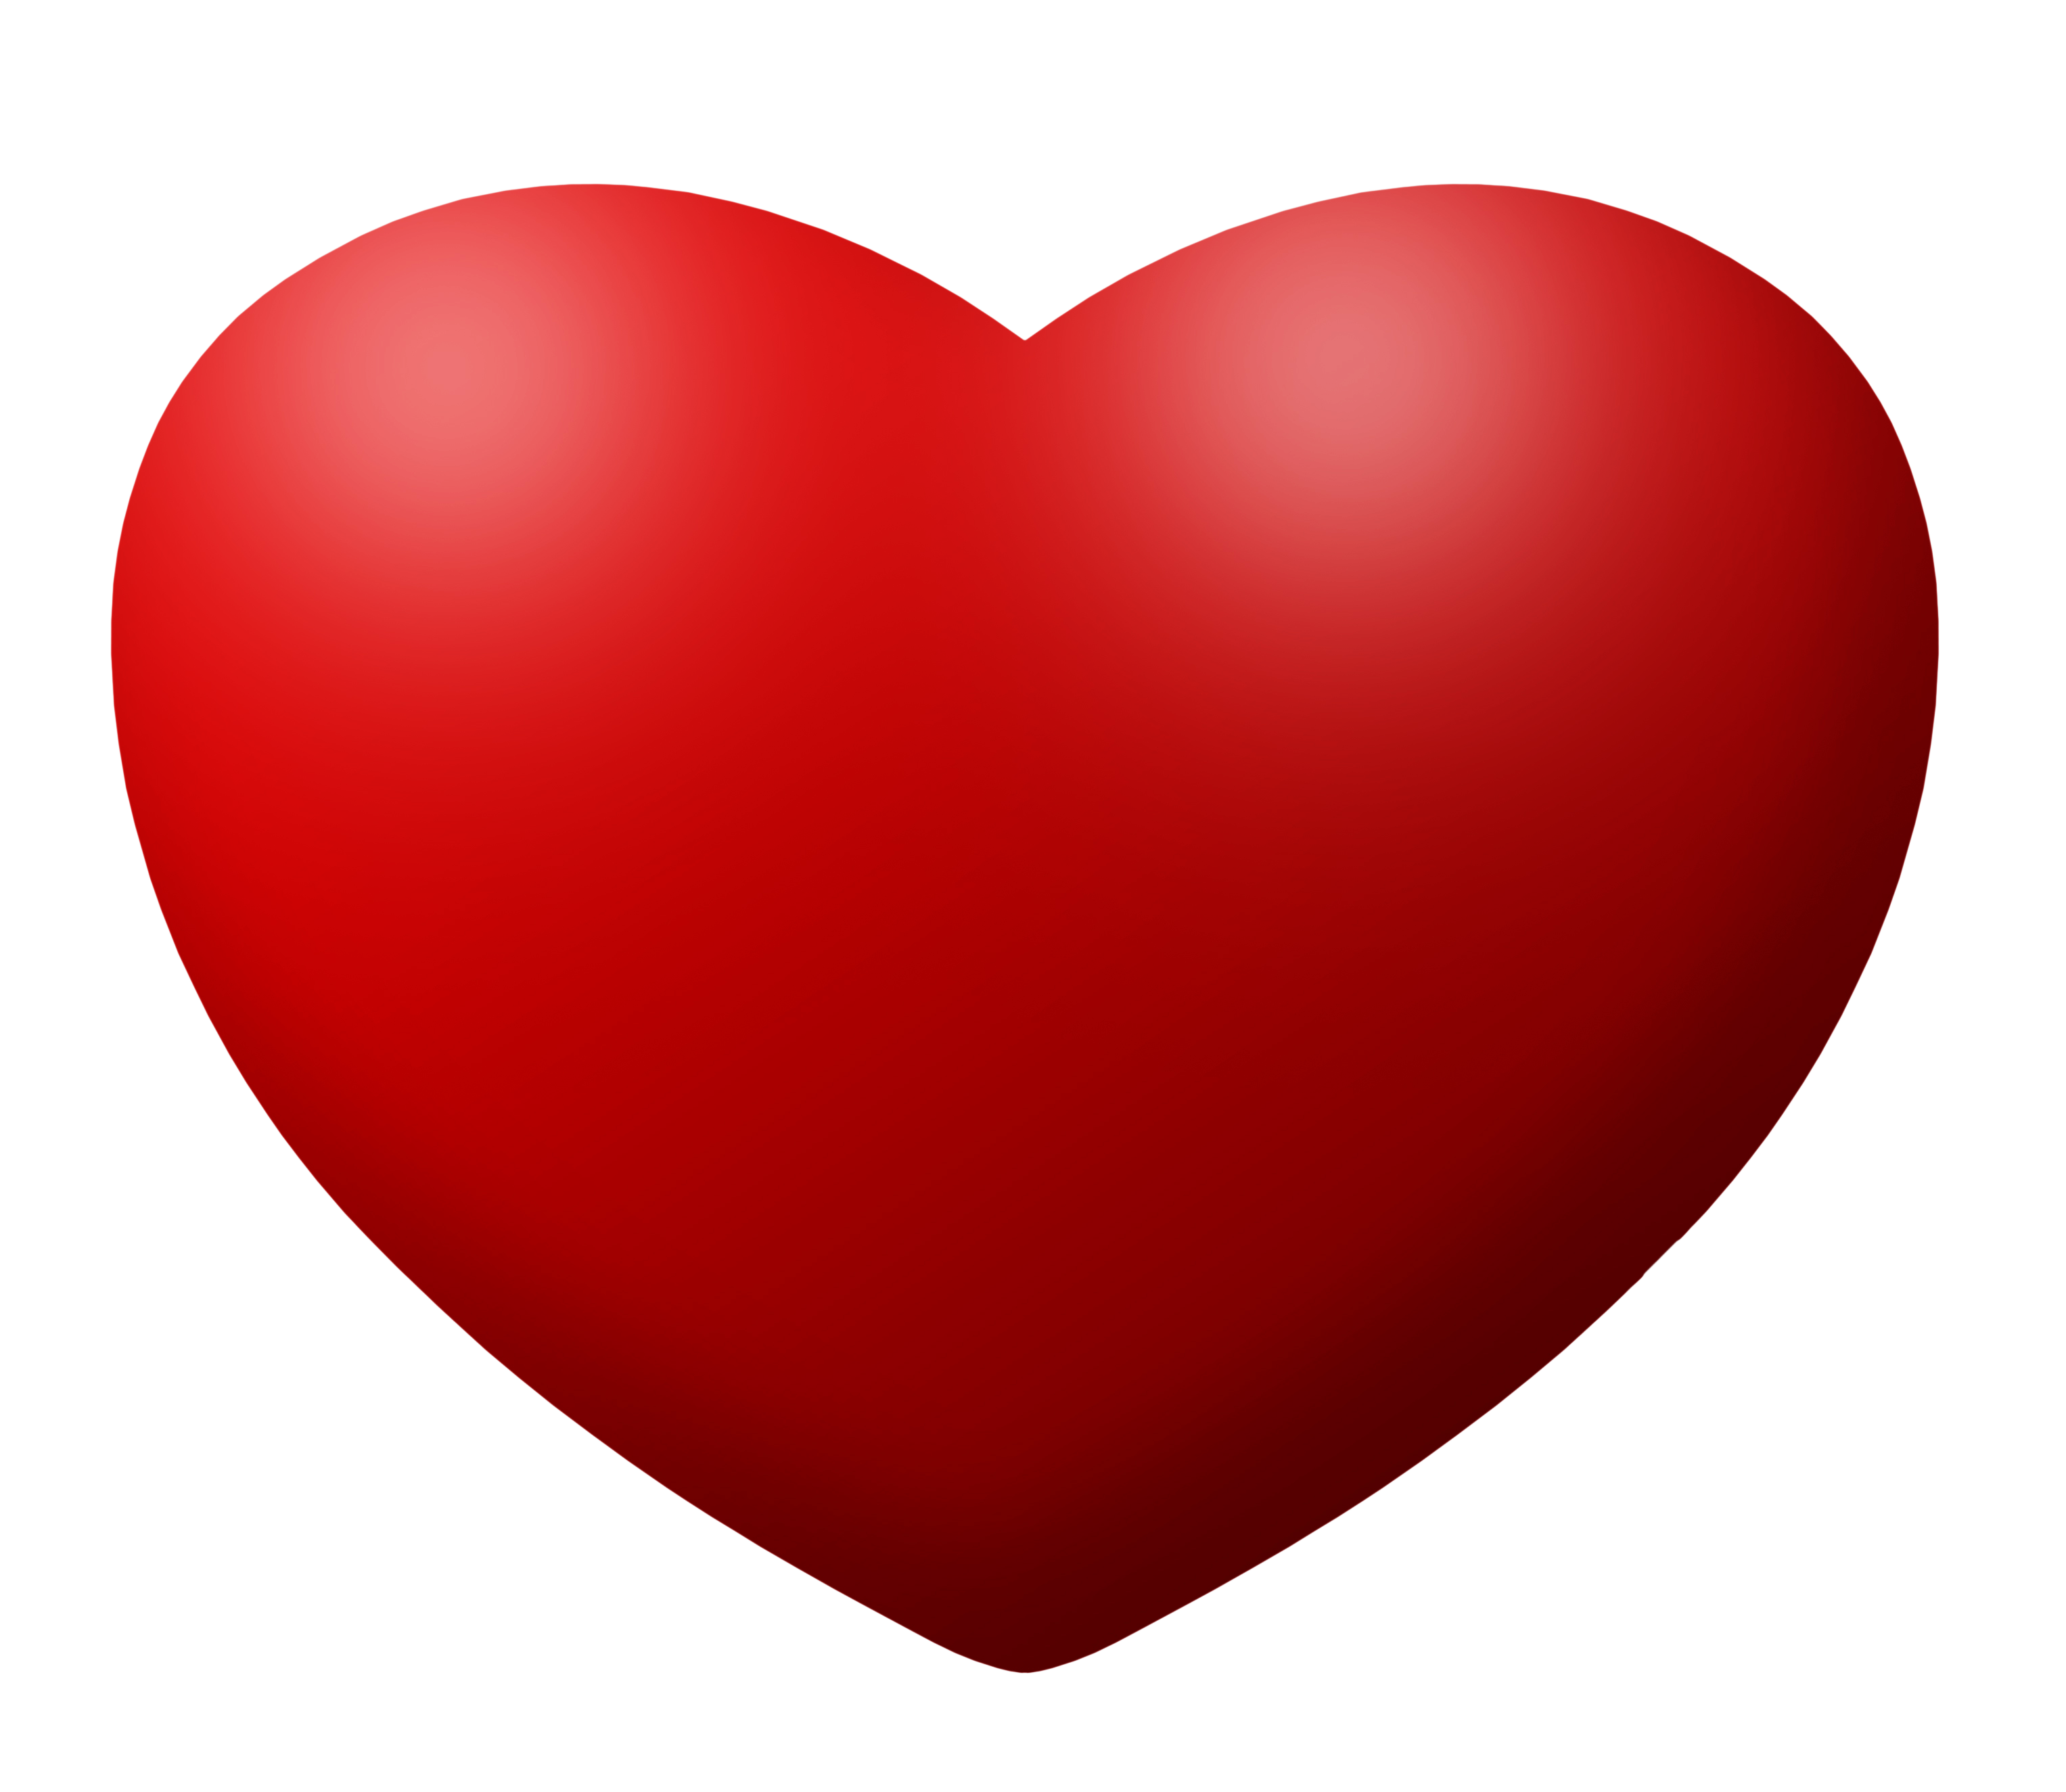 Red Heart PNG Image HD